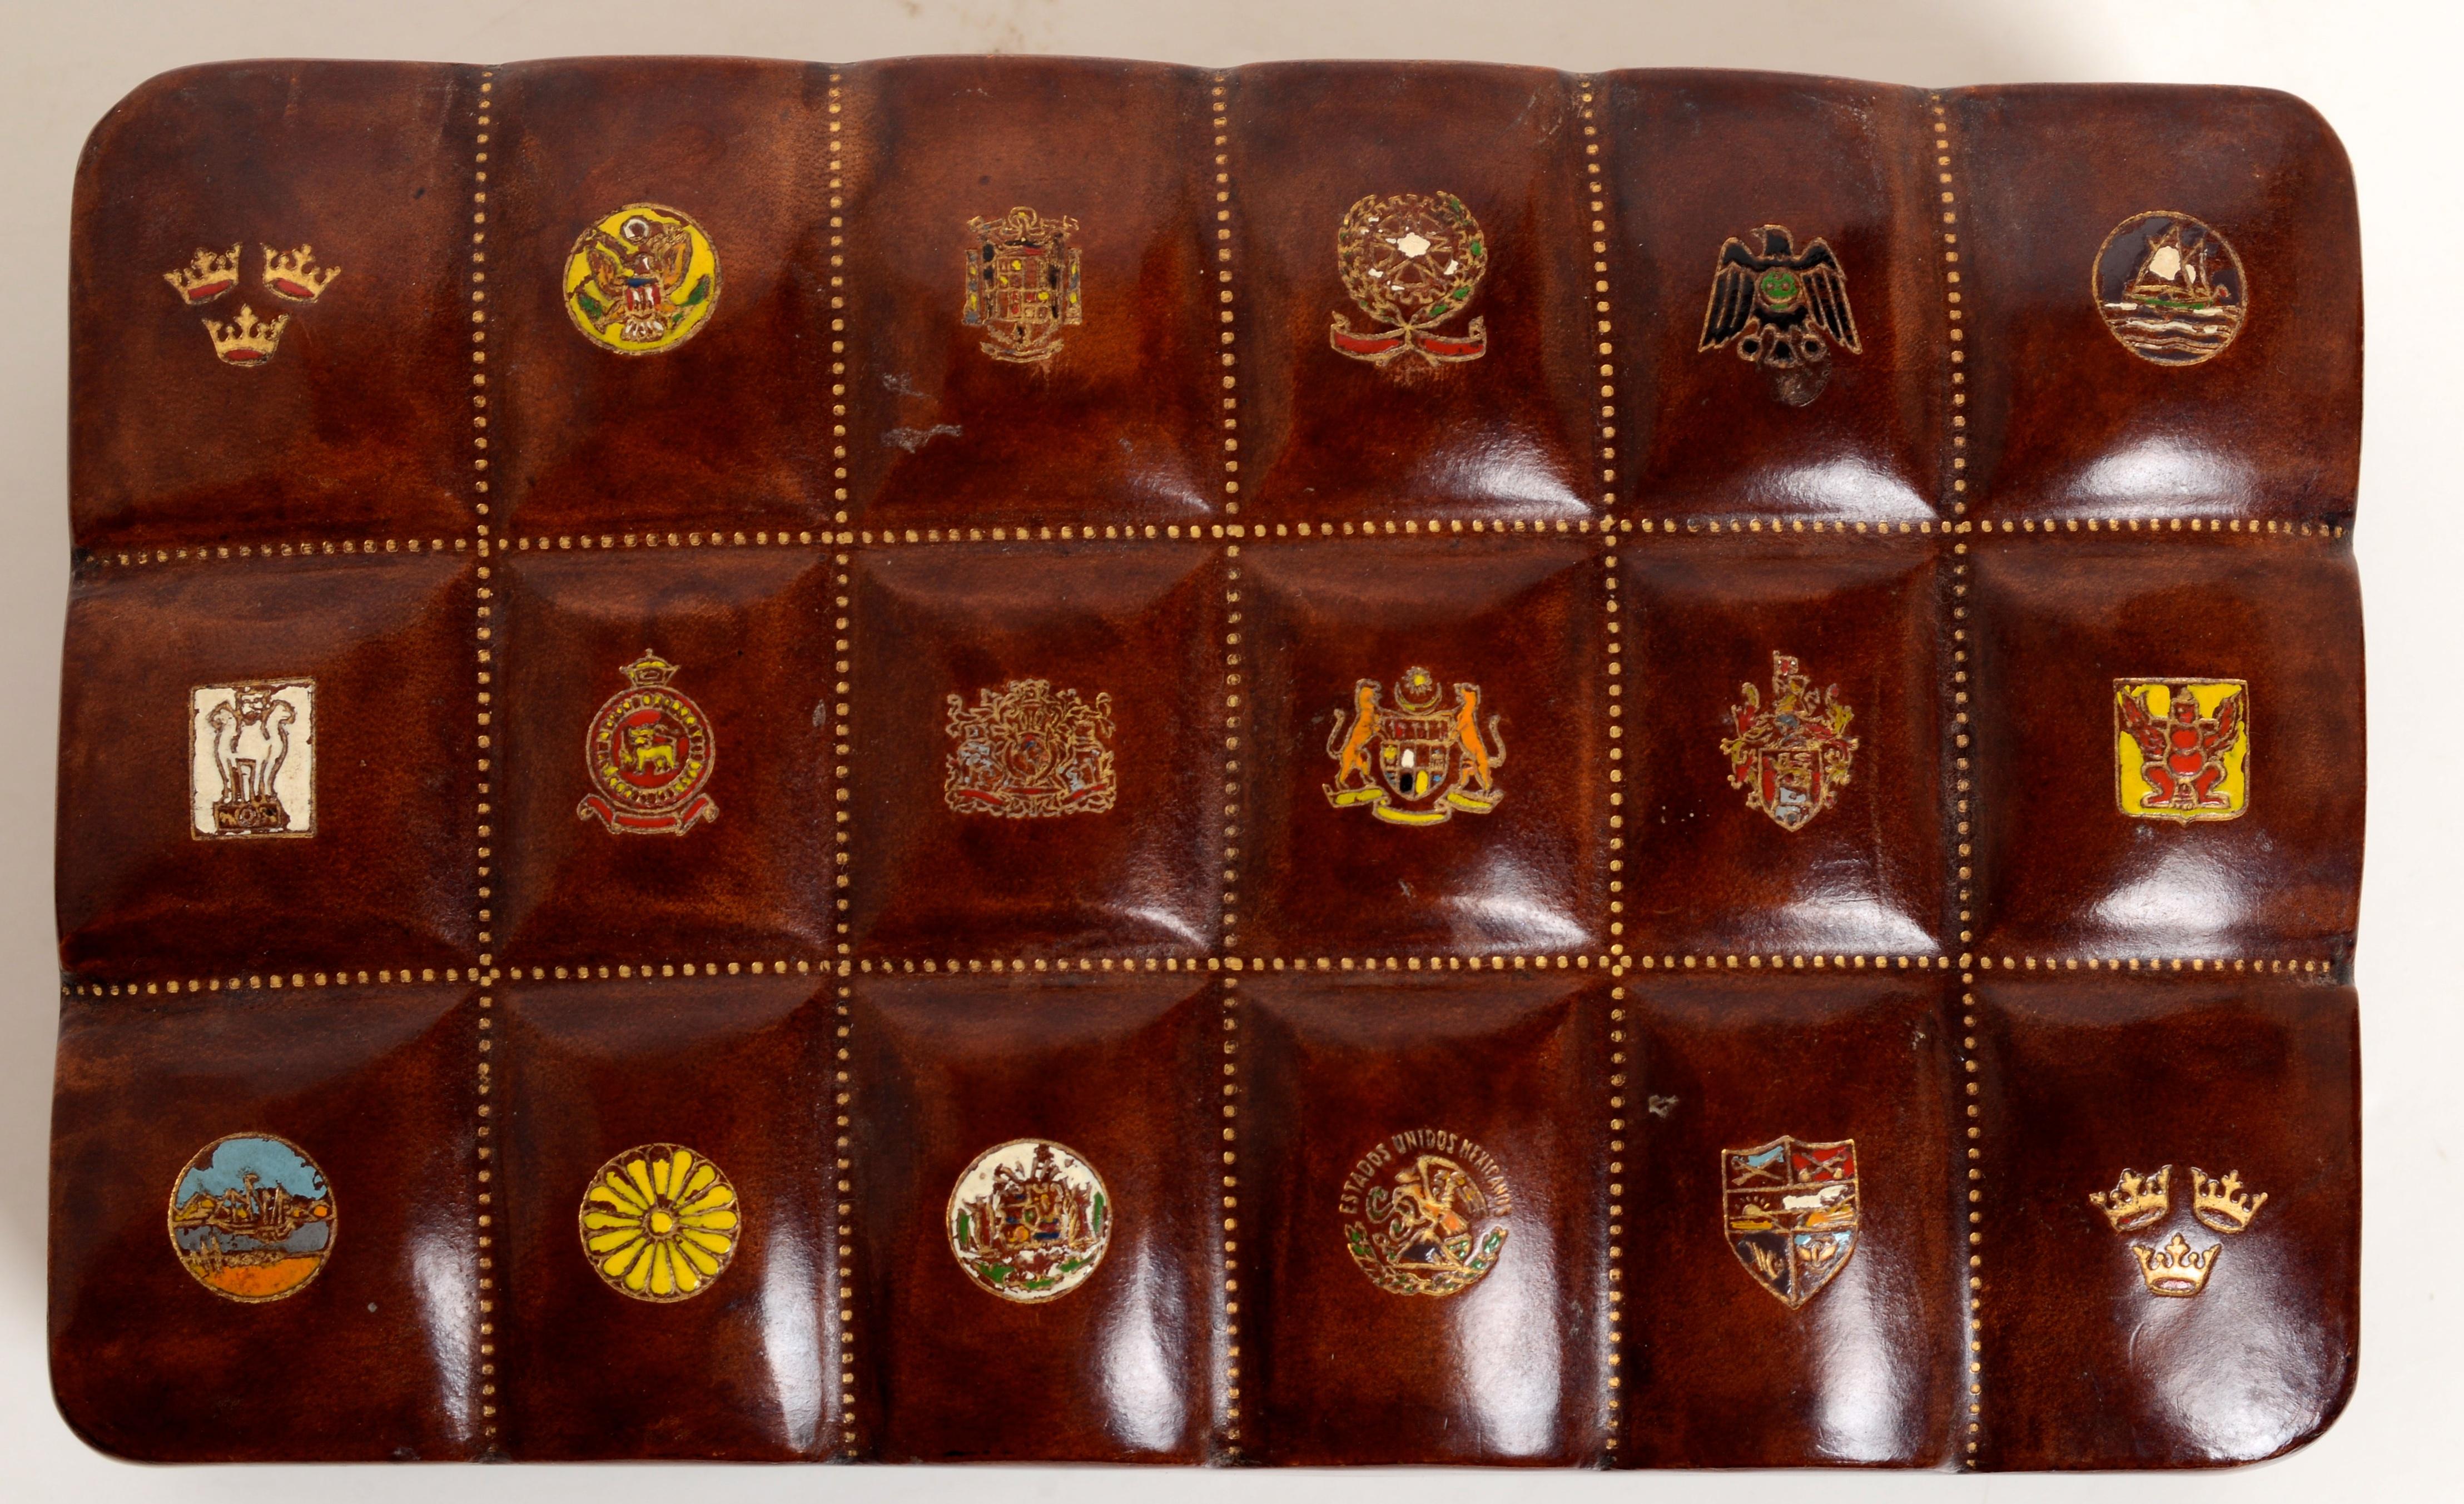 Leather Swedish American Line Jewelry Dresser Box, c1950. The top with 18 raised rectangles each embossed with a different colored Swedish armorial cartouches signifying the ports of call that the Swedish American Steamship Line serviced.. The